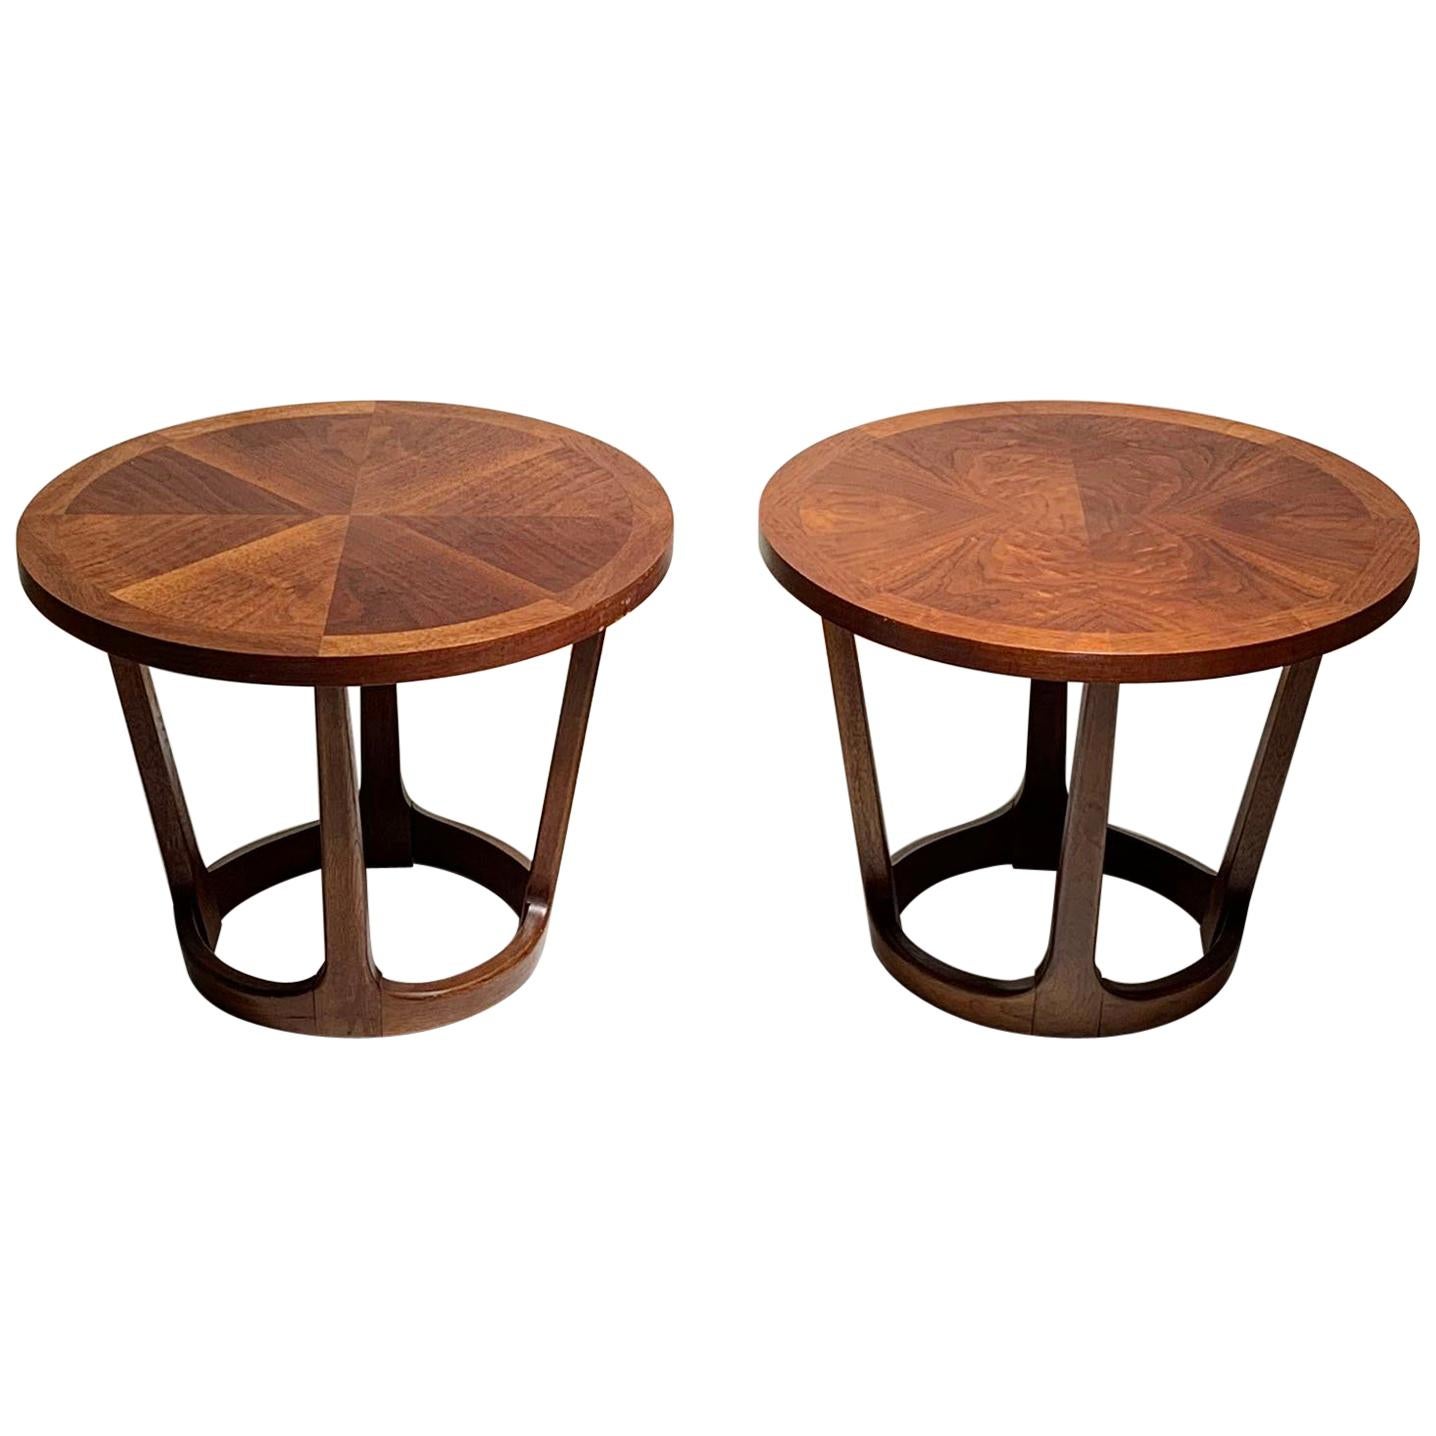 Pair of Vintage Lane Round Drum End Table 997-22 / Rhythm Collection